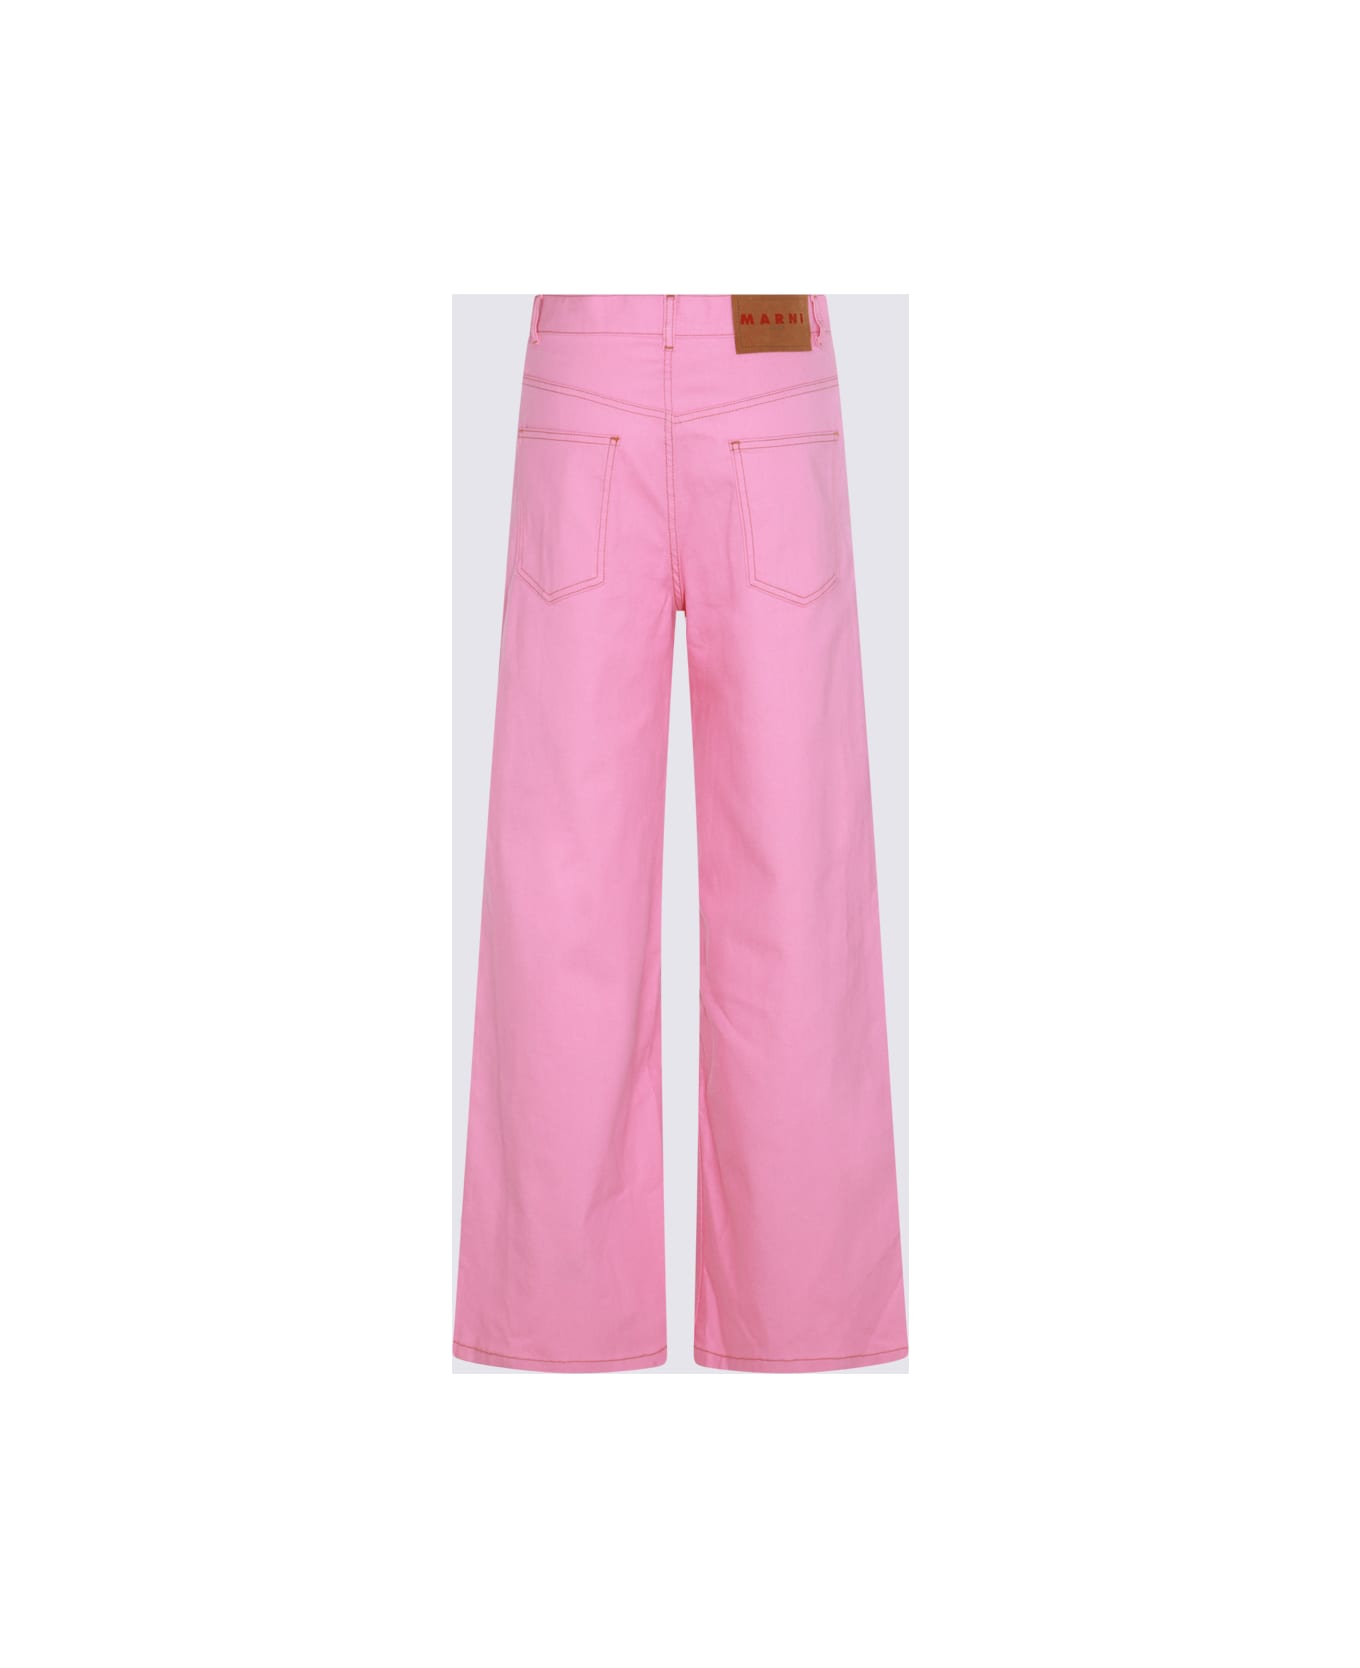 Marni Pink Cotton Jeans - PINK CLEMATIS